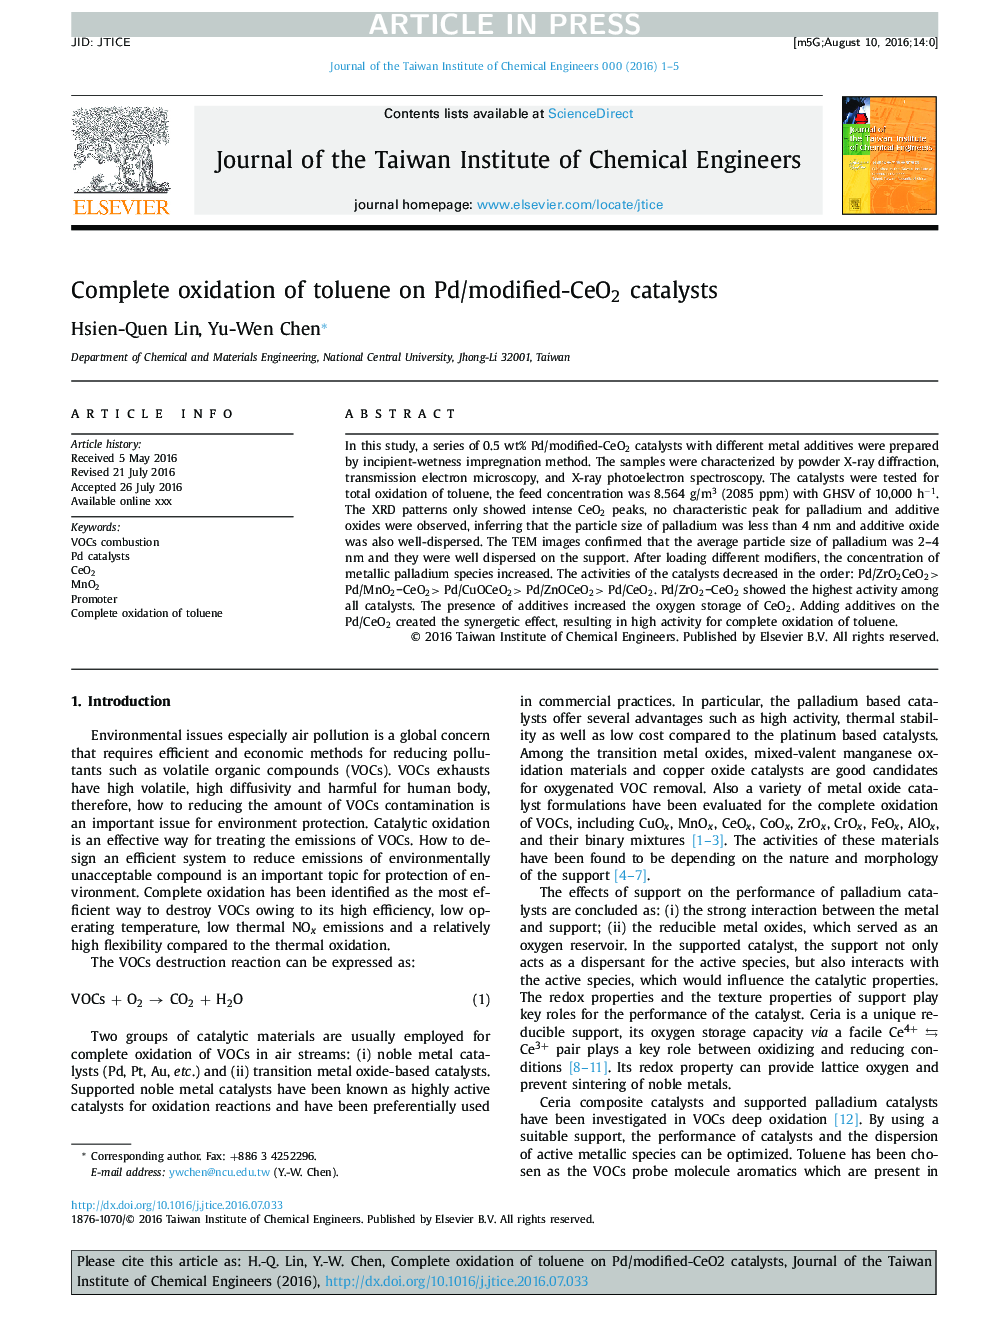 Complete oxidation of toluene on Pd/modified-CeO2 catalysts